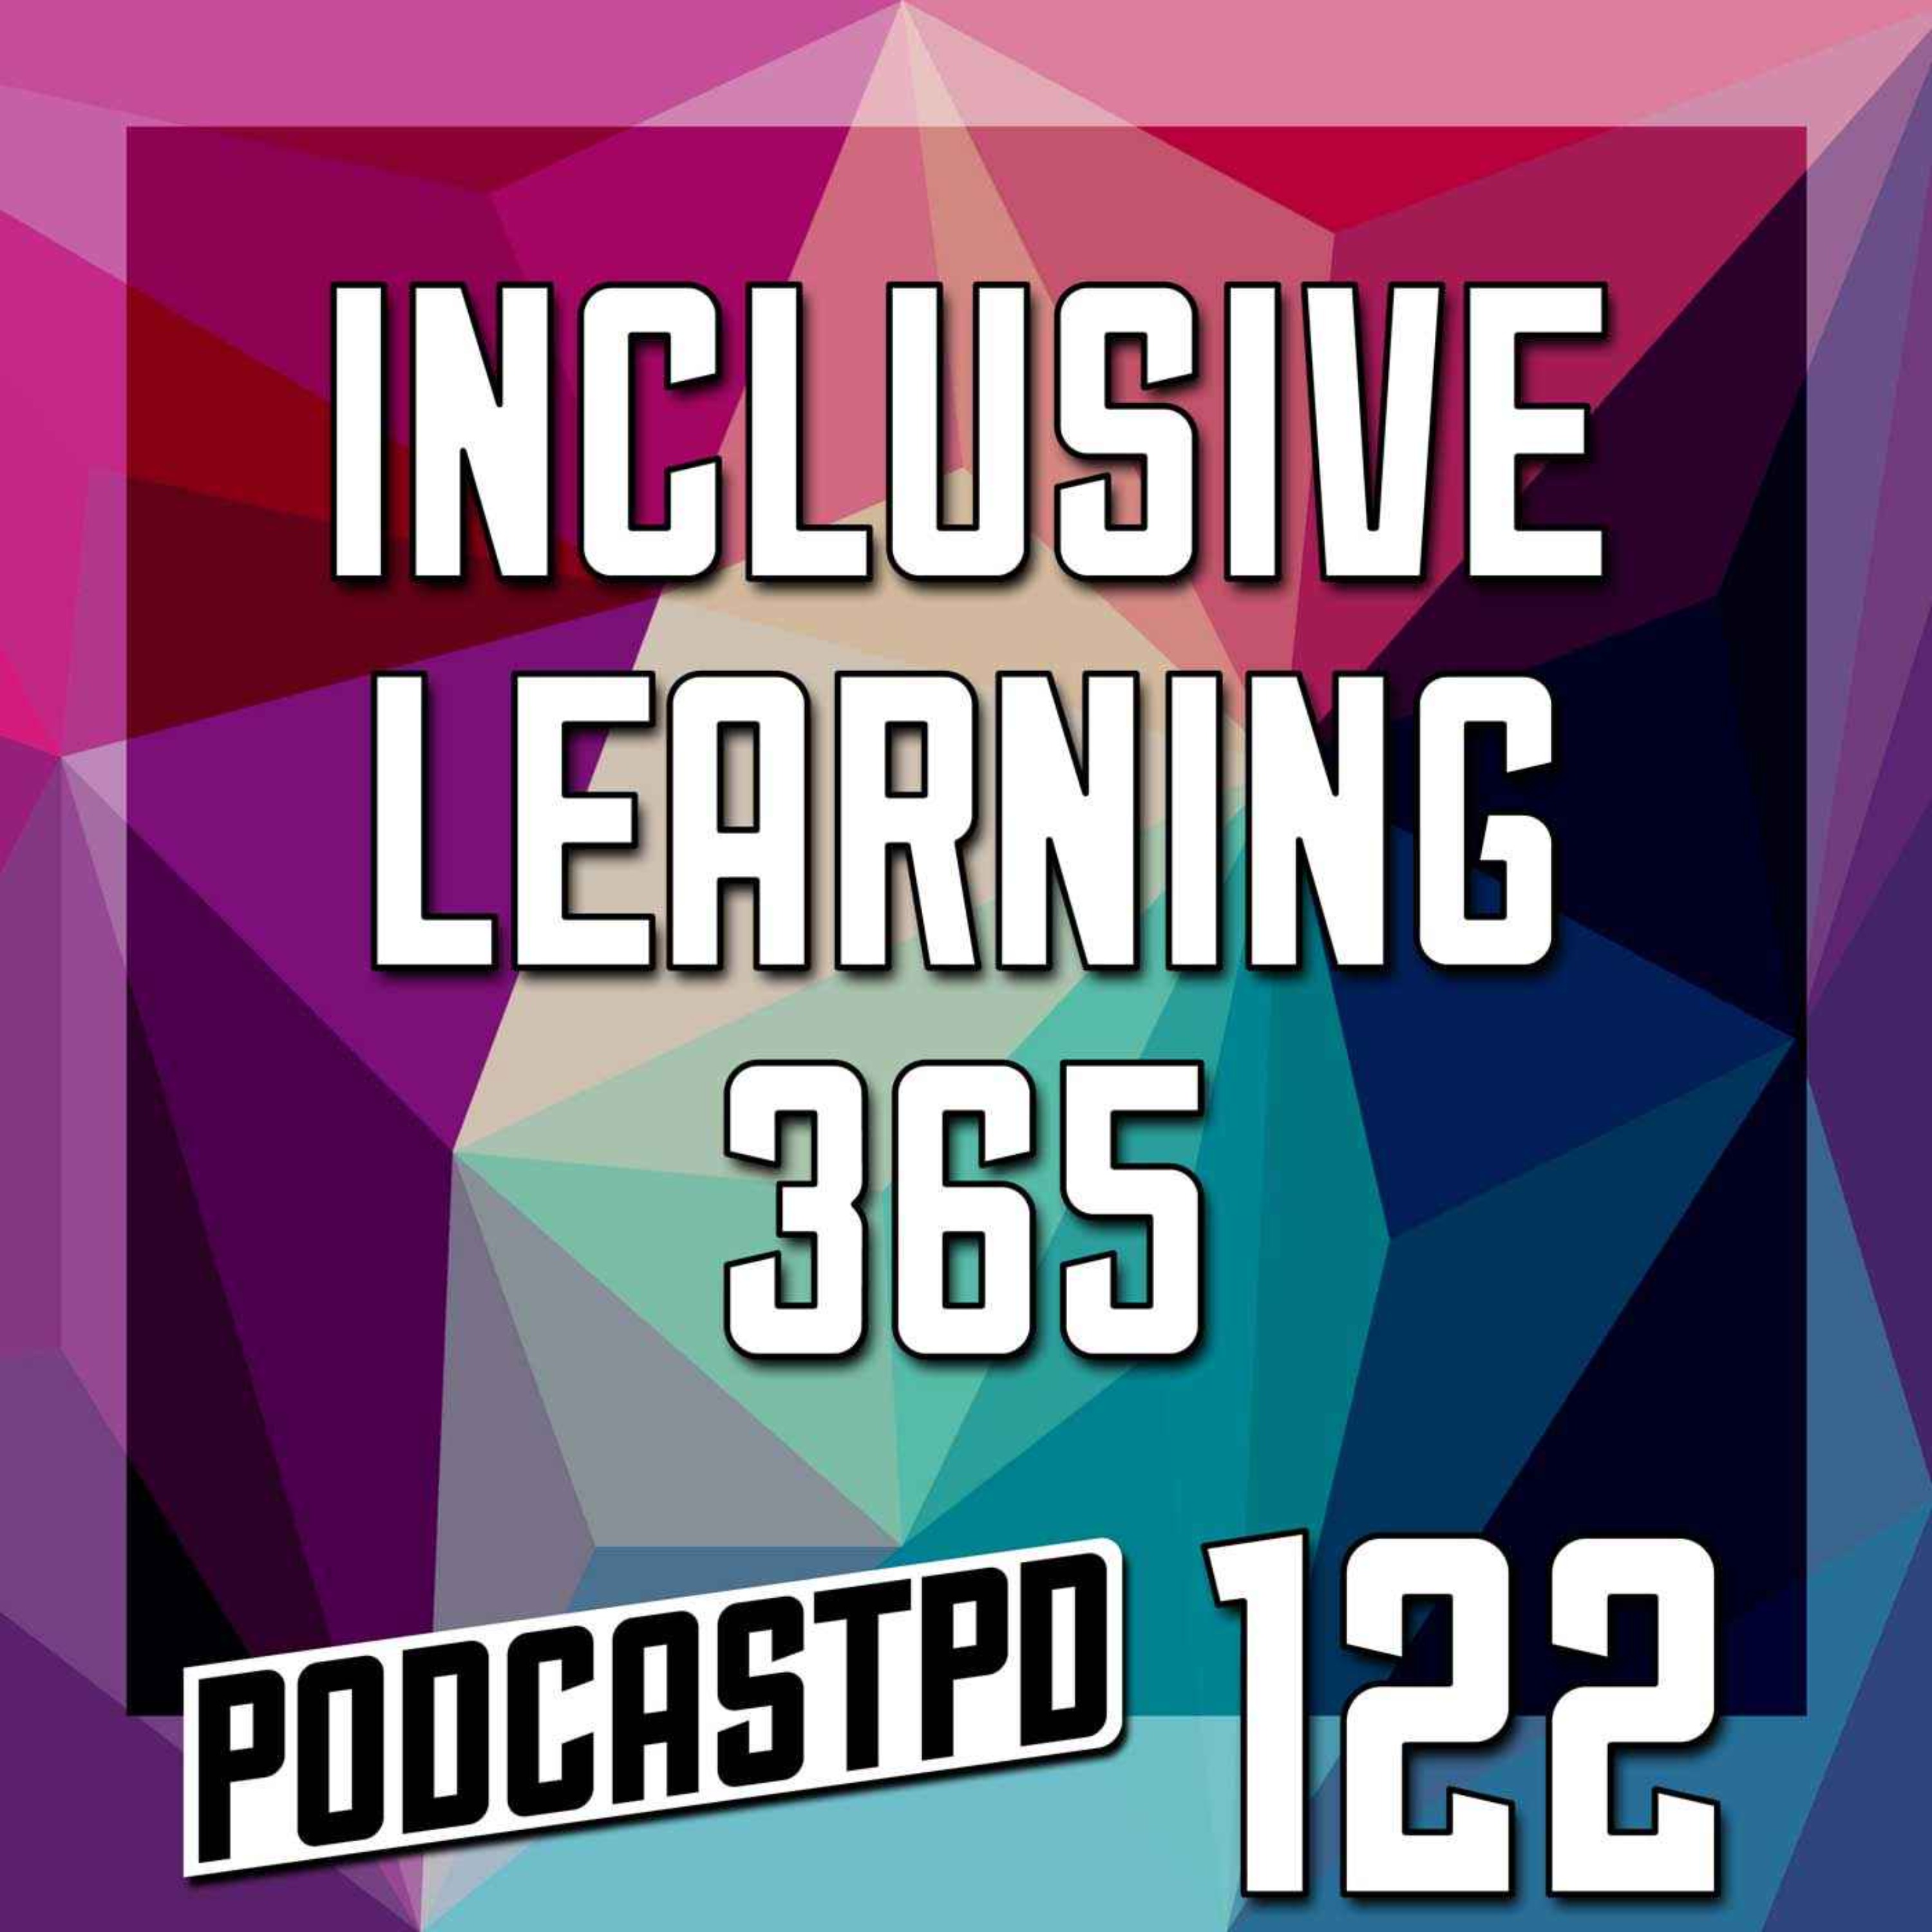 Inclusive Learning 365 - PPD122 Image